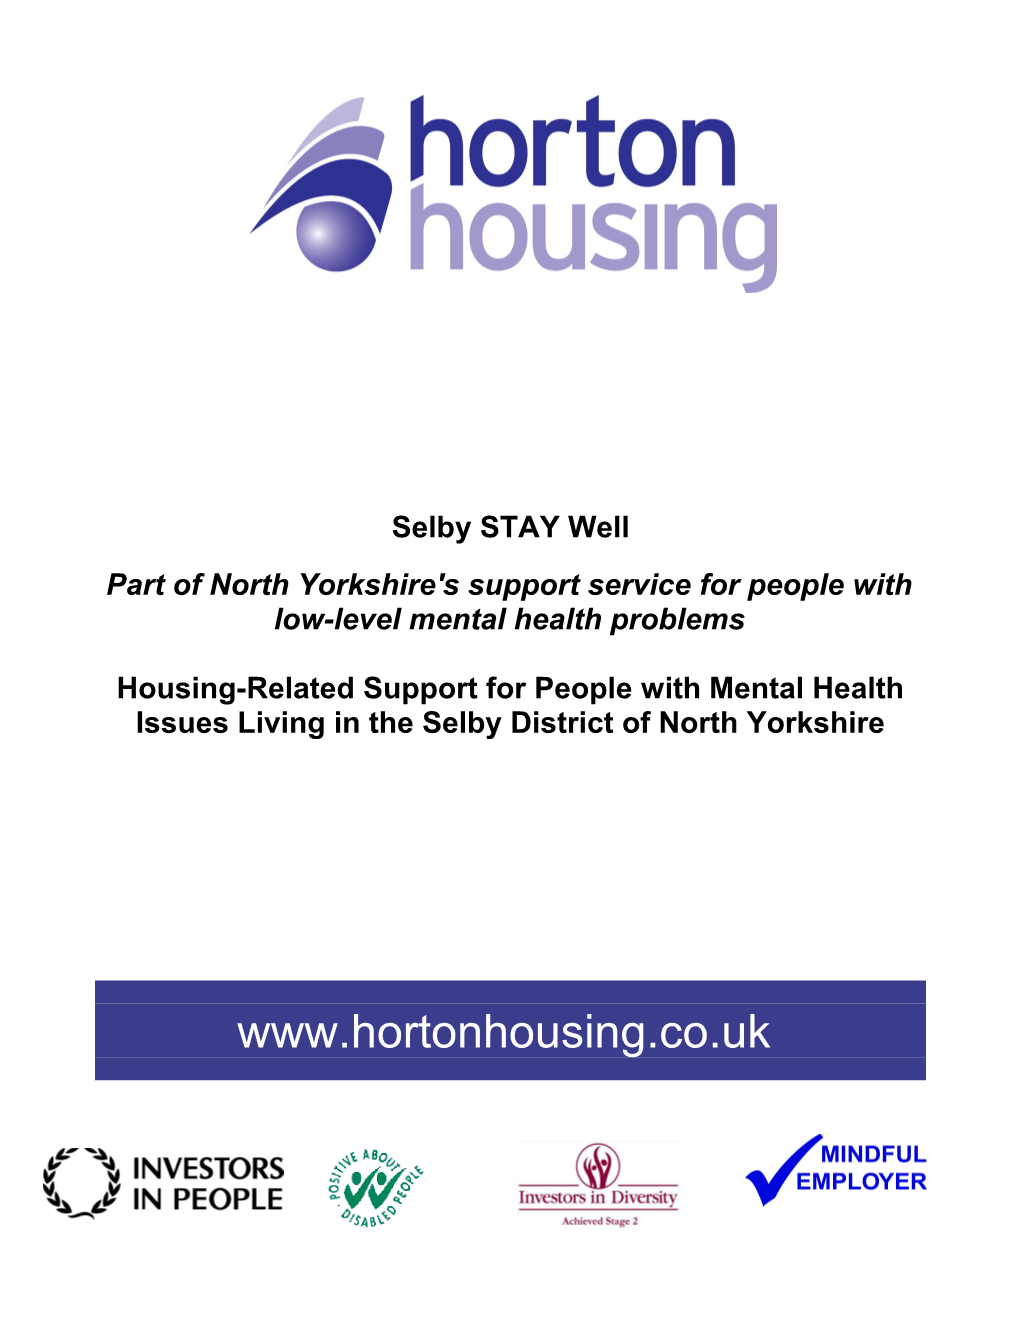 Housing-Related Support for People with Mental Health Issues Living in the Selby District